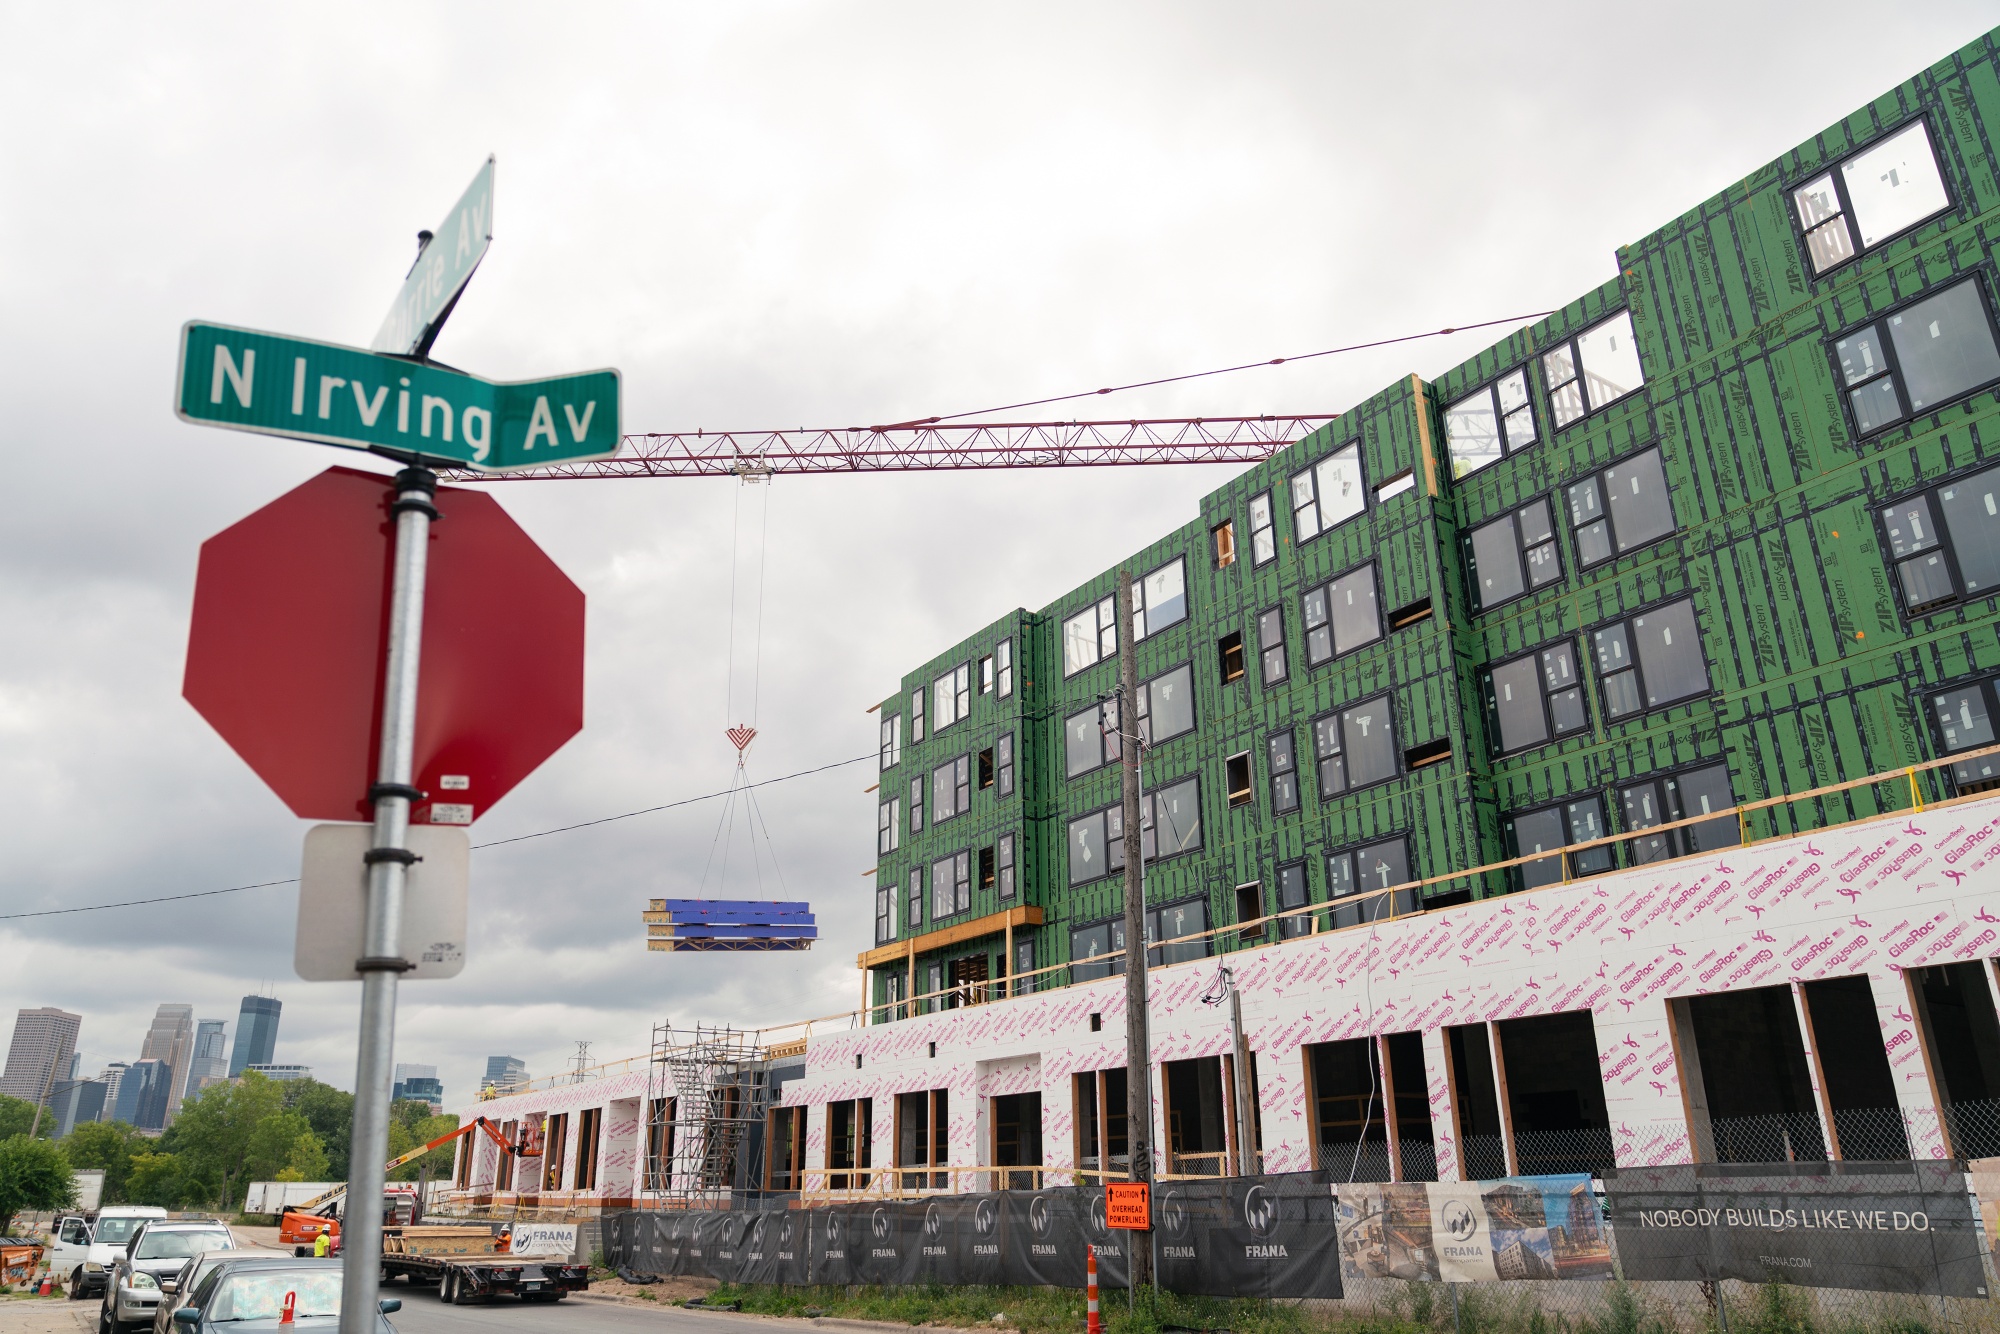 5 Lessons from Cities On Affordable Housing (And One Surprise)